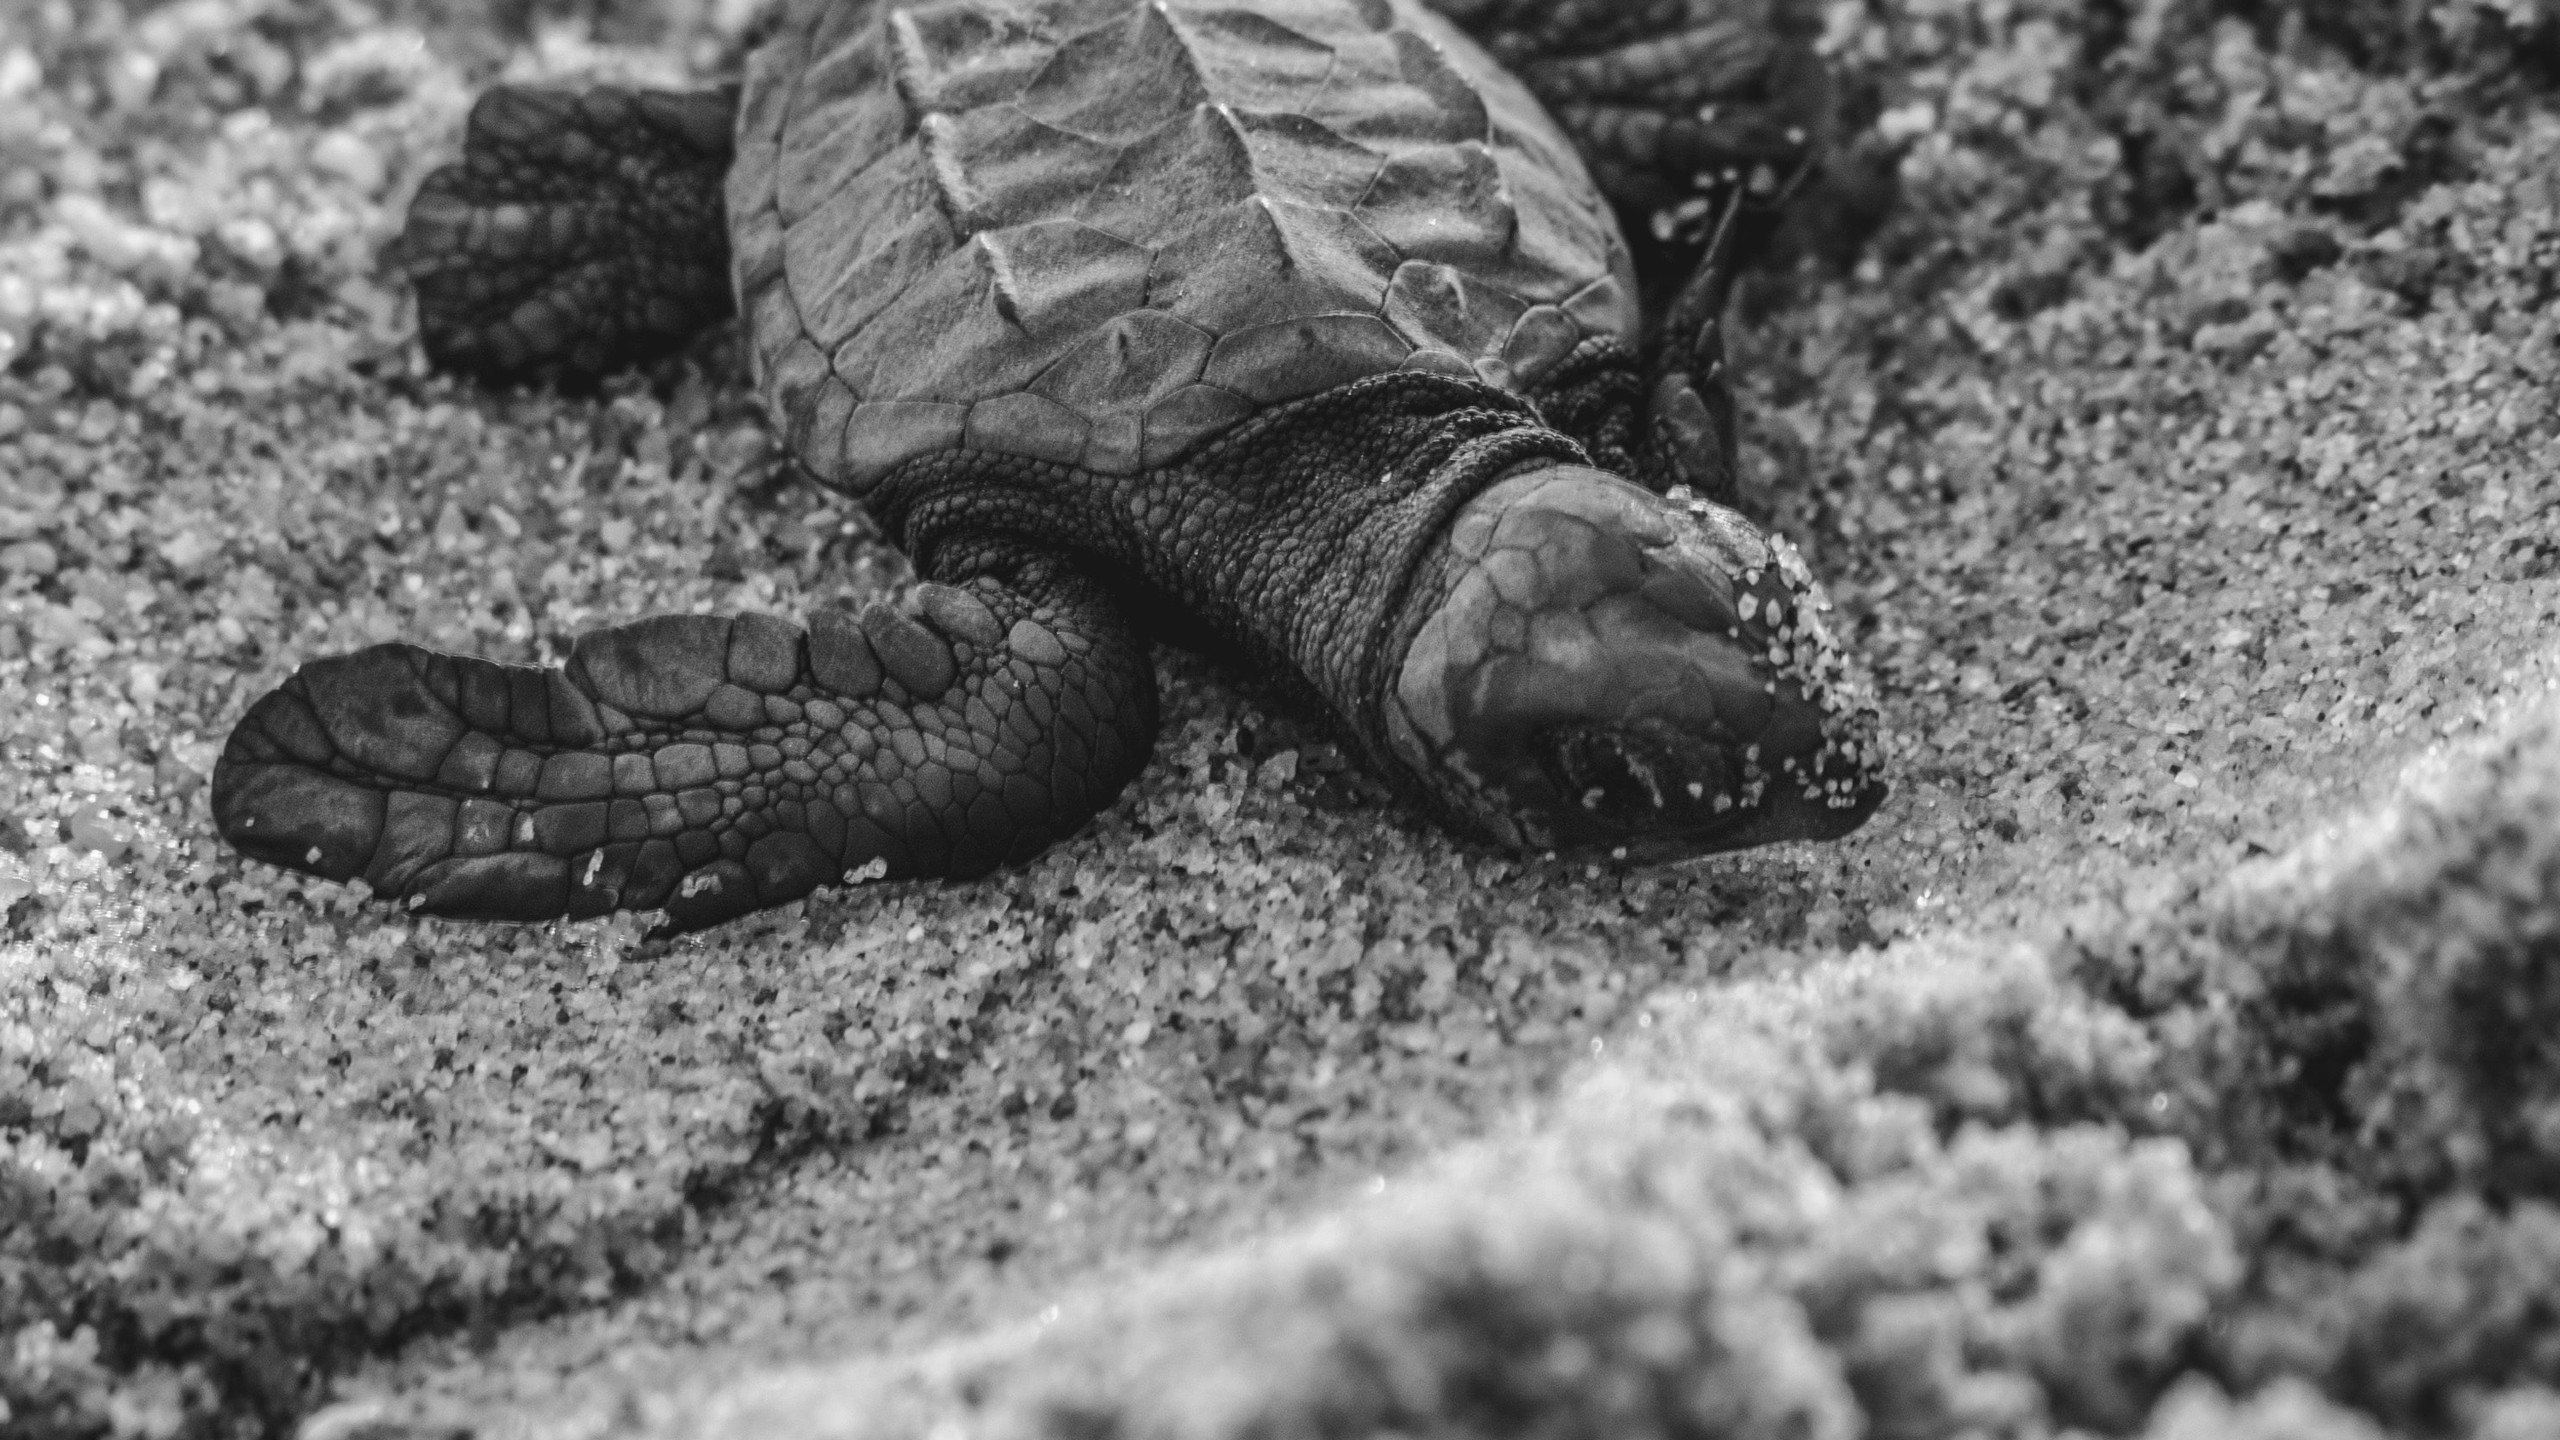 File photo of a turtle hatchling on a beach. Photo: Alfonso Navarro